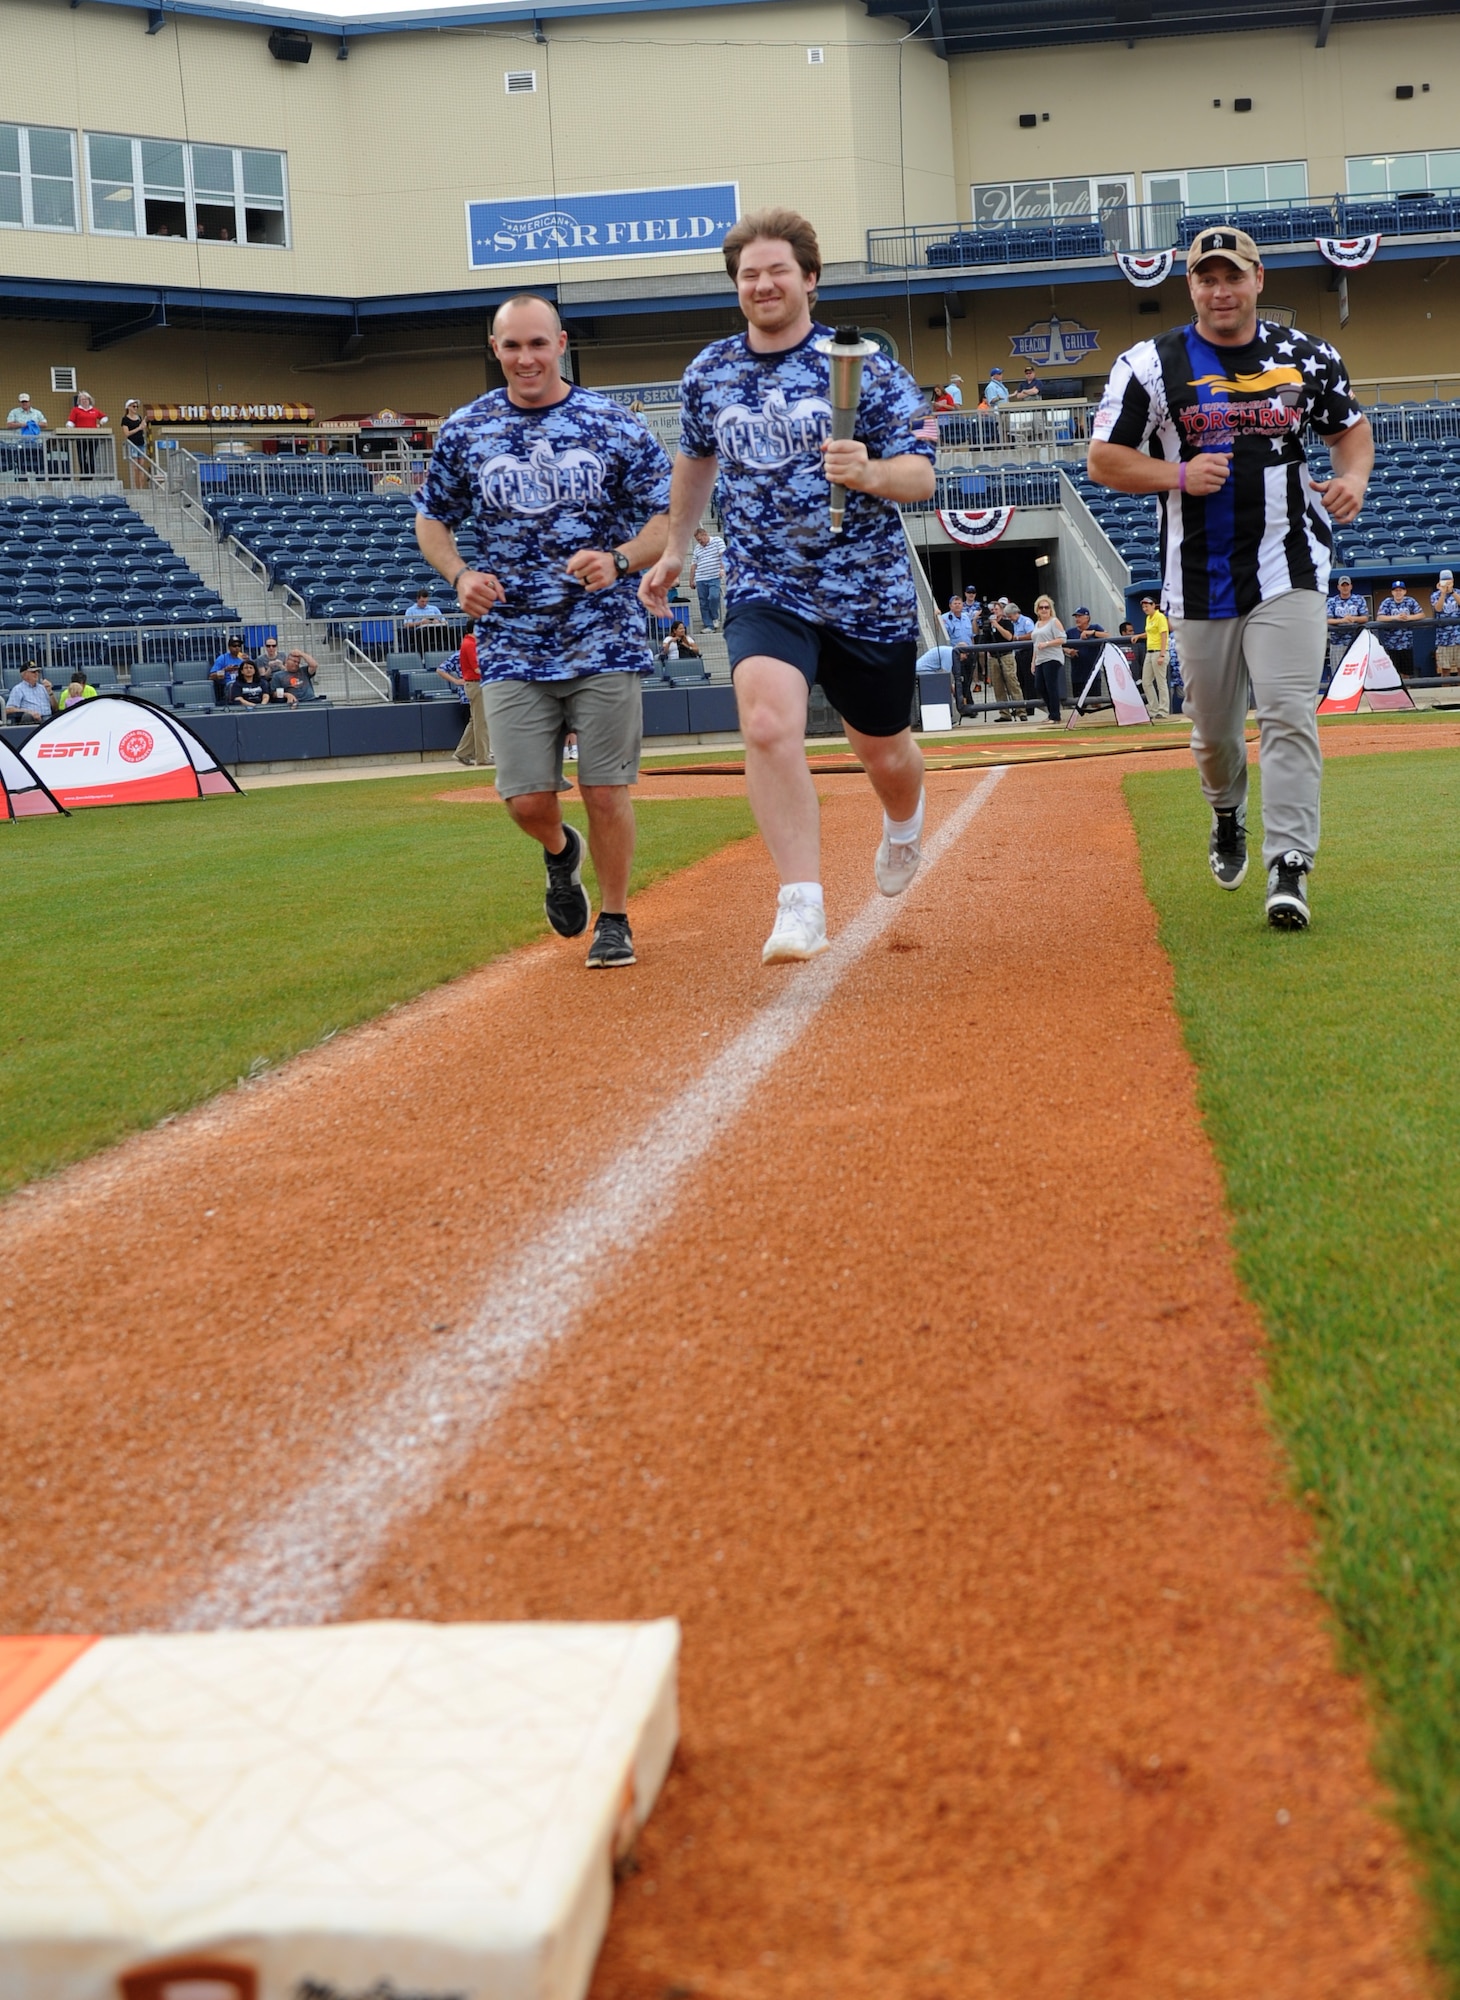 Capt. Harlan Glinski, 81st Security Forces operations officer and “Boots” team member; Lee Brown, Special Olympics athlete; and Doug DeGeorge, Biloxi Police Department police officer and “Badges” team member, participate in the torch run around the baseball field during the “Boots versus Badges” softball game at the Biloxi Shuckers MGM Park April 21, 2016, Biloxi, Miss. The game was the kickoff event for the 2016 Special Olympics Mississippi Summer Games, which will be hosted by Keesler Air Force Base, Miss., May 20-21. (U.S. Air Force photo by Kemberly Groue)